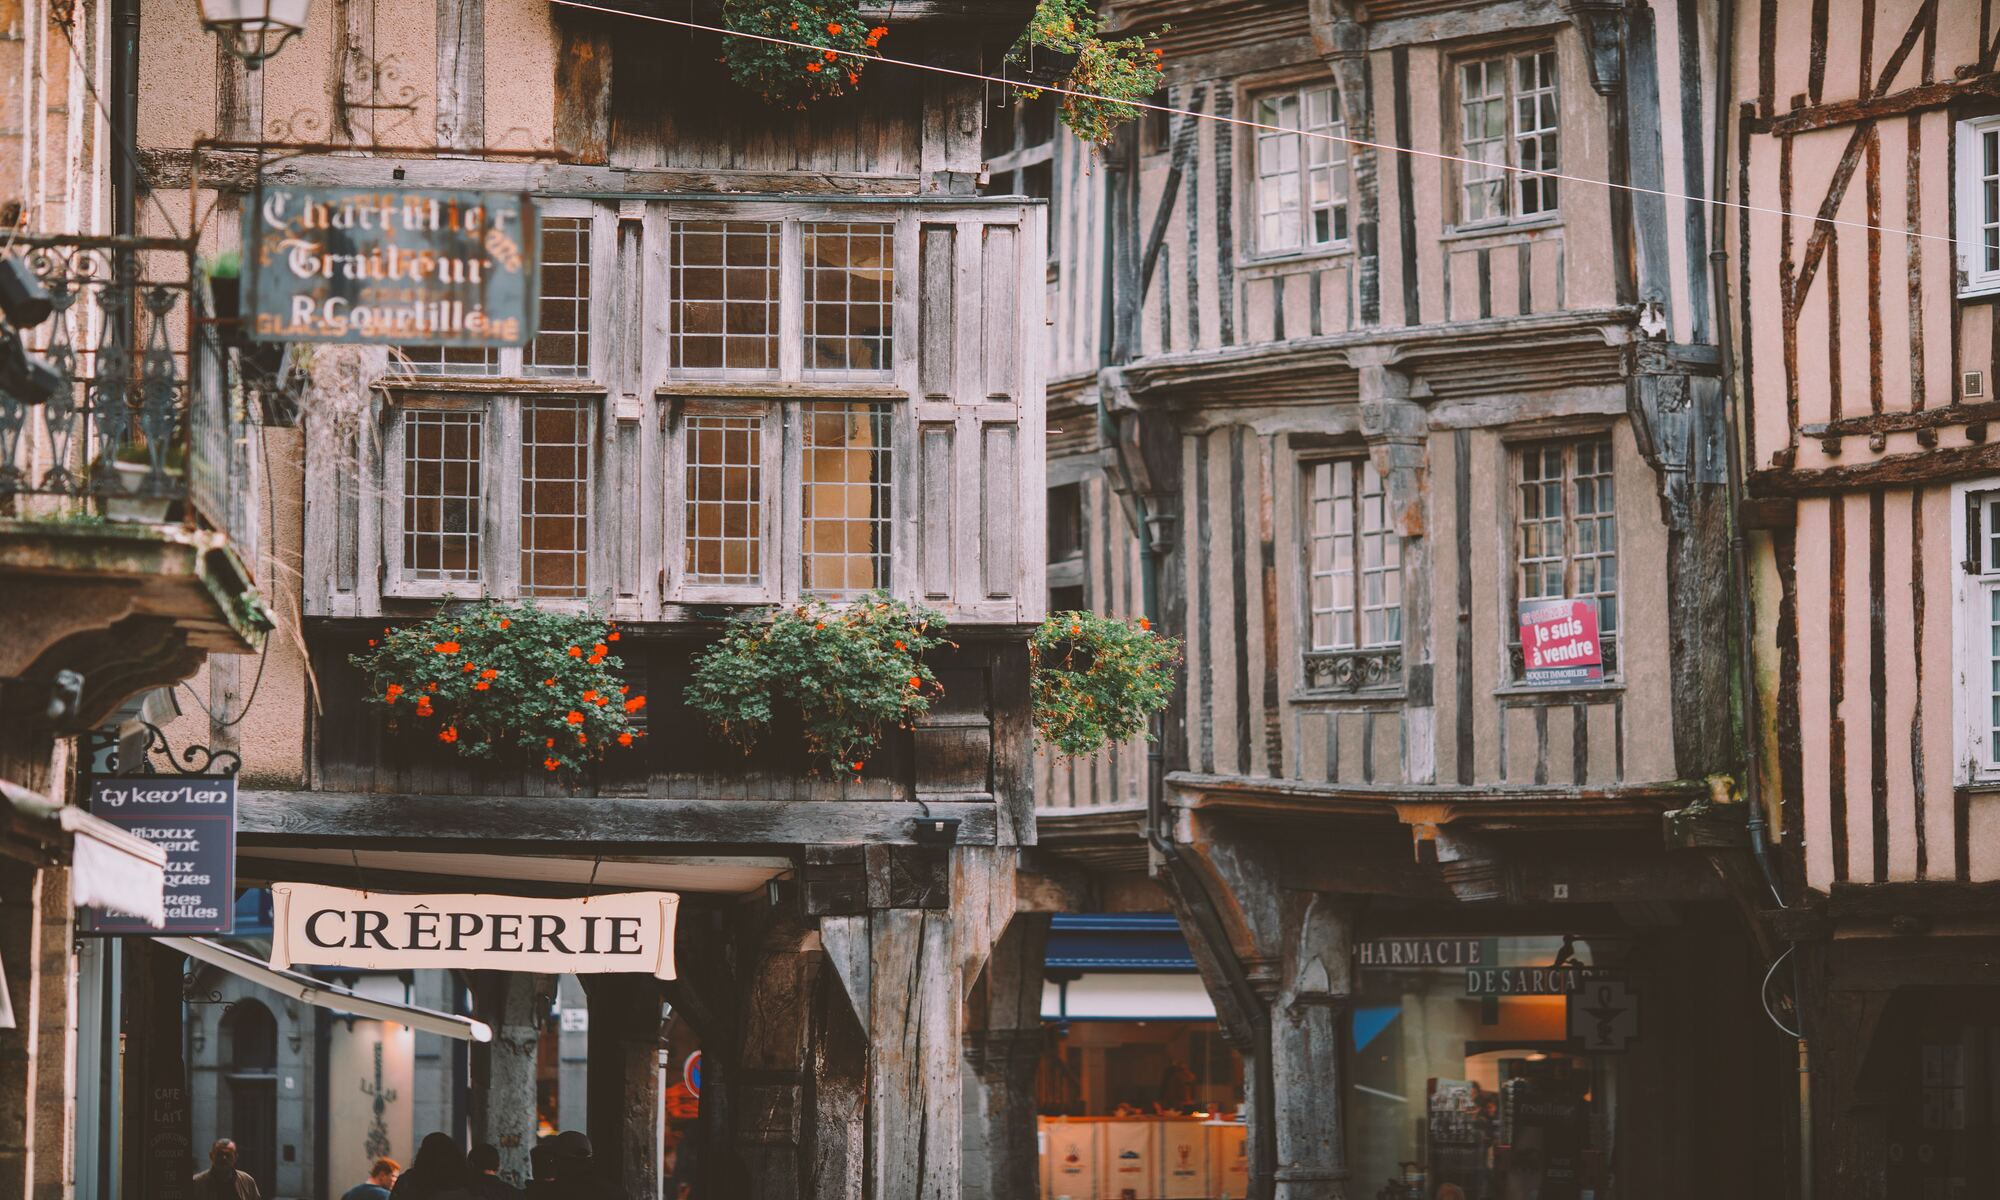 Street in France with creperie